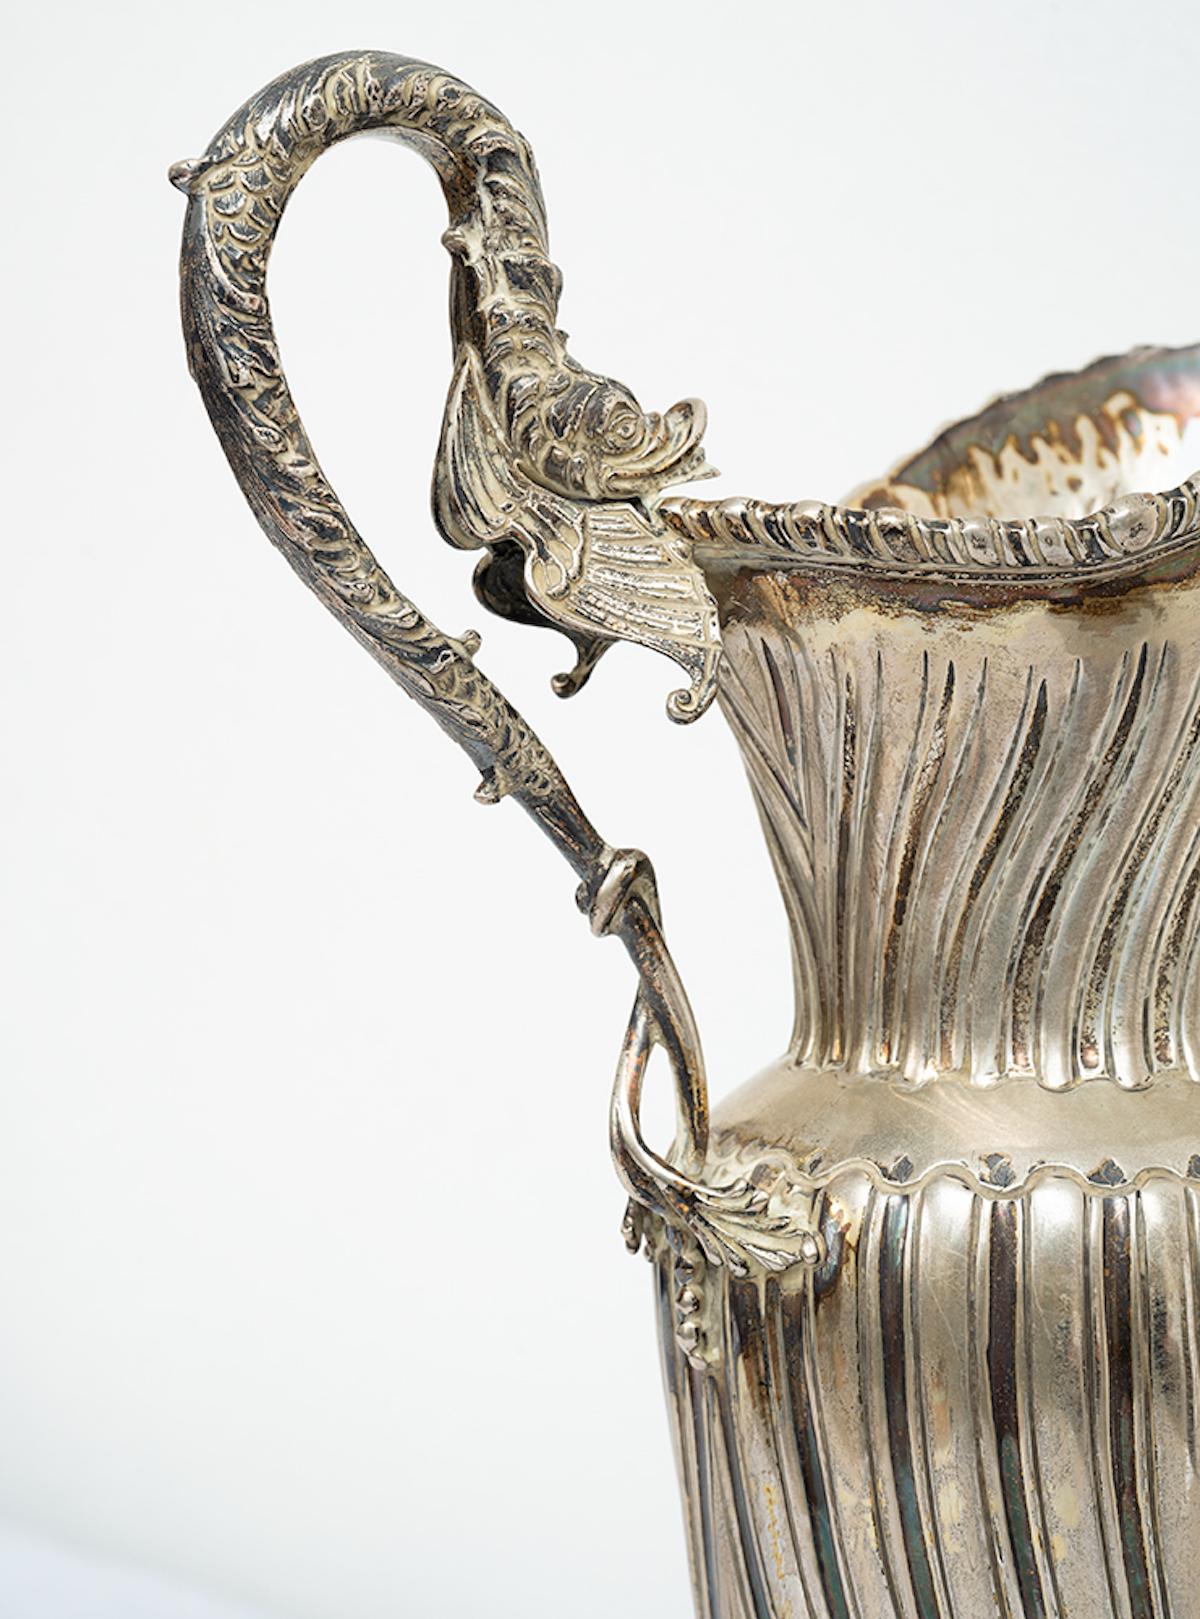 Antique Neapolitan silver pourer belonging to the early 20th century. - Sculpture by Unknown